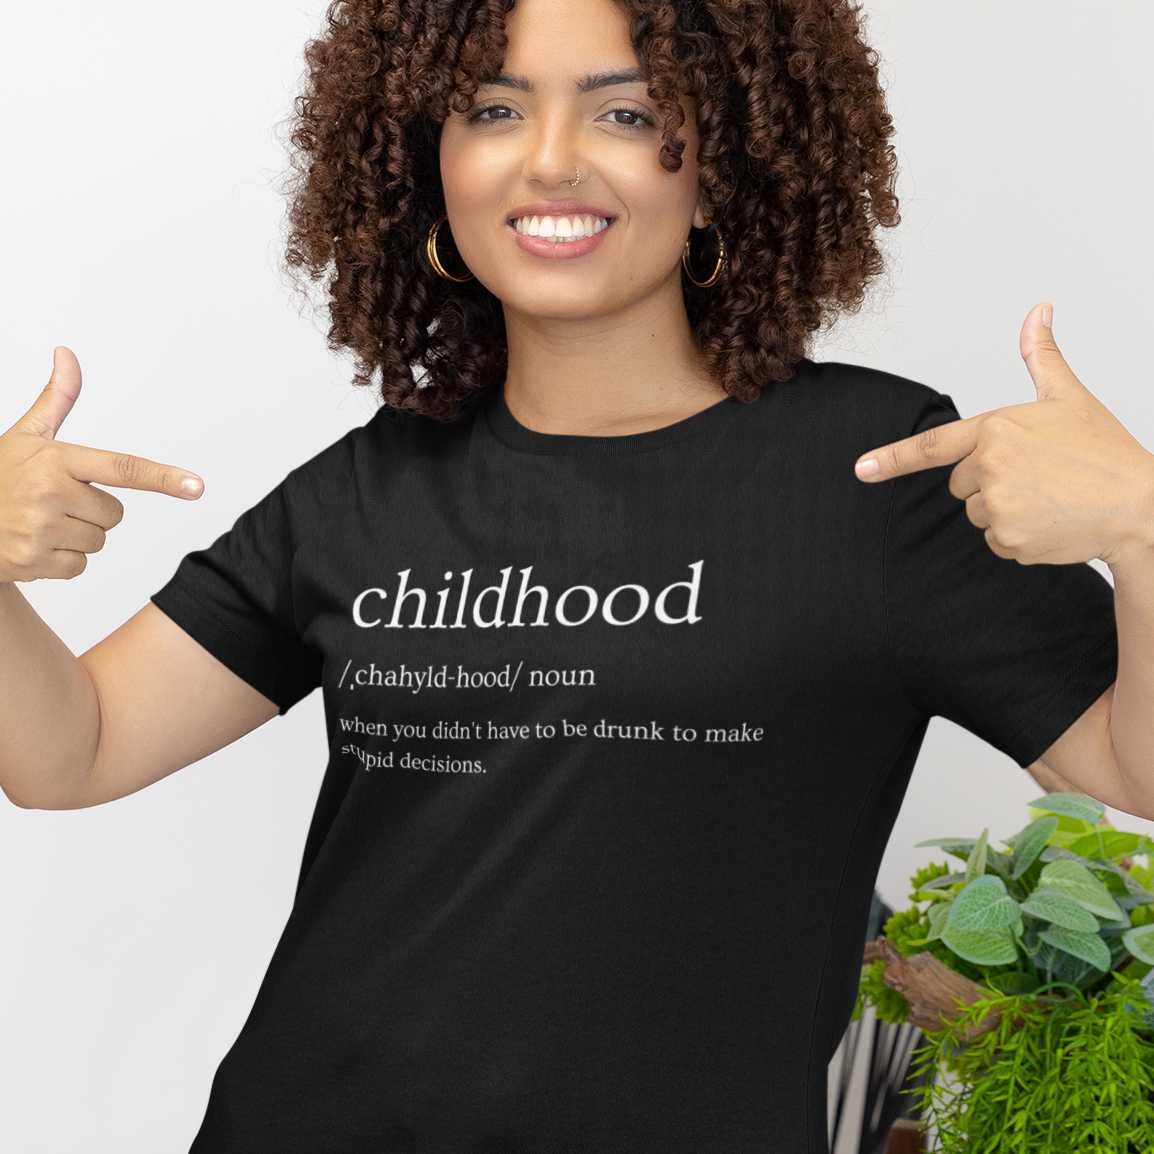 childhood-definition-mockup-featuring-a-woman-pointing-at-her-bella-canvas-t-shirt